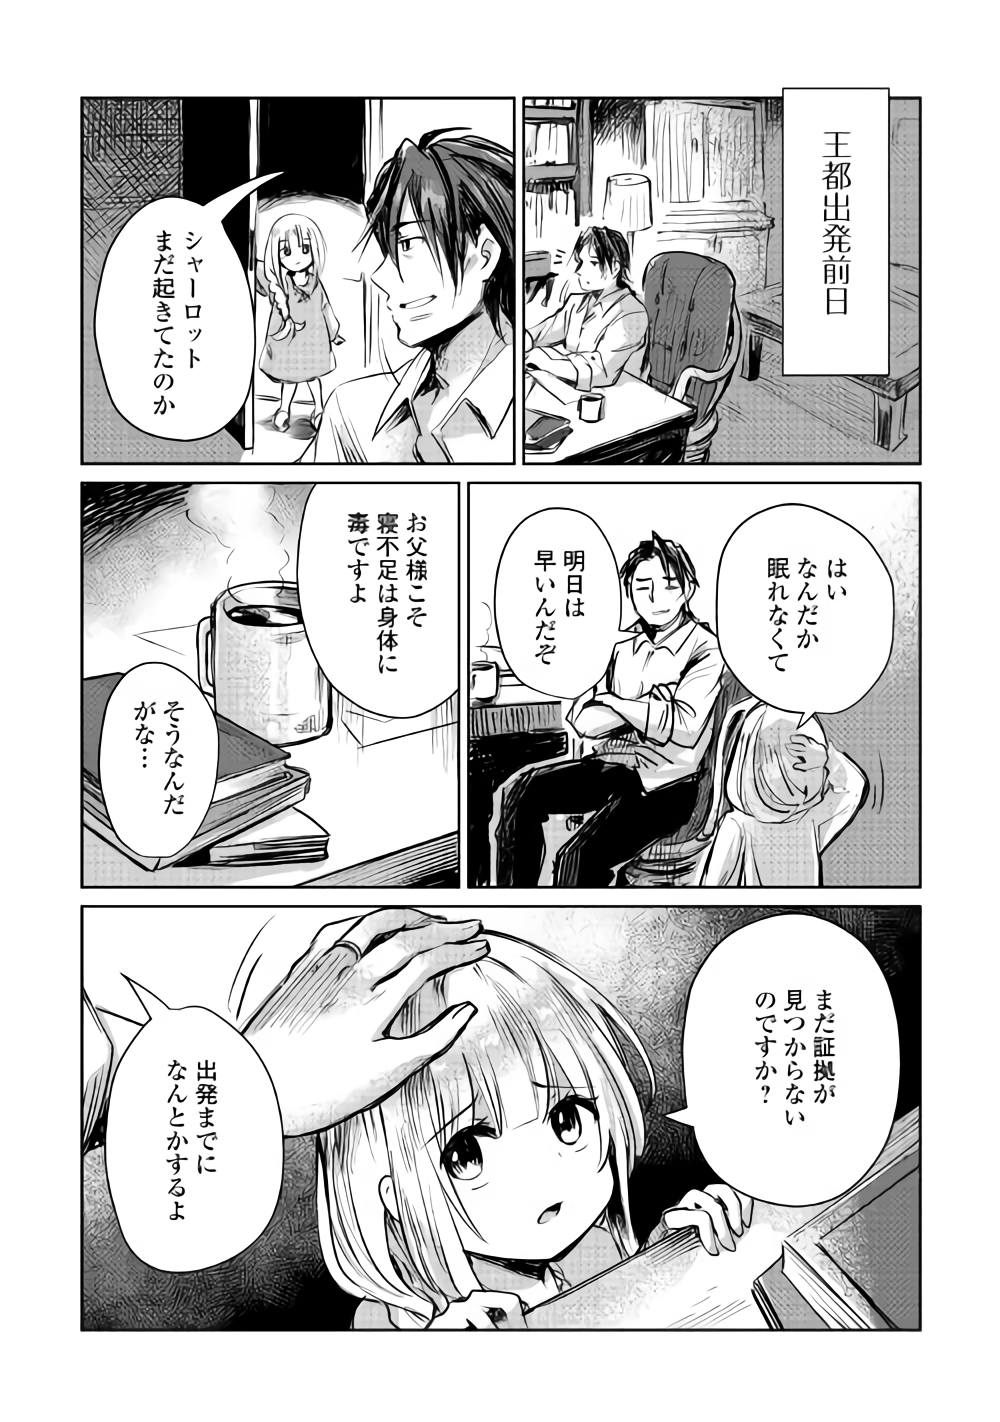 The Former Structural Researcher’s Story of Otherworldly Adventure 第7話 - Page 35